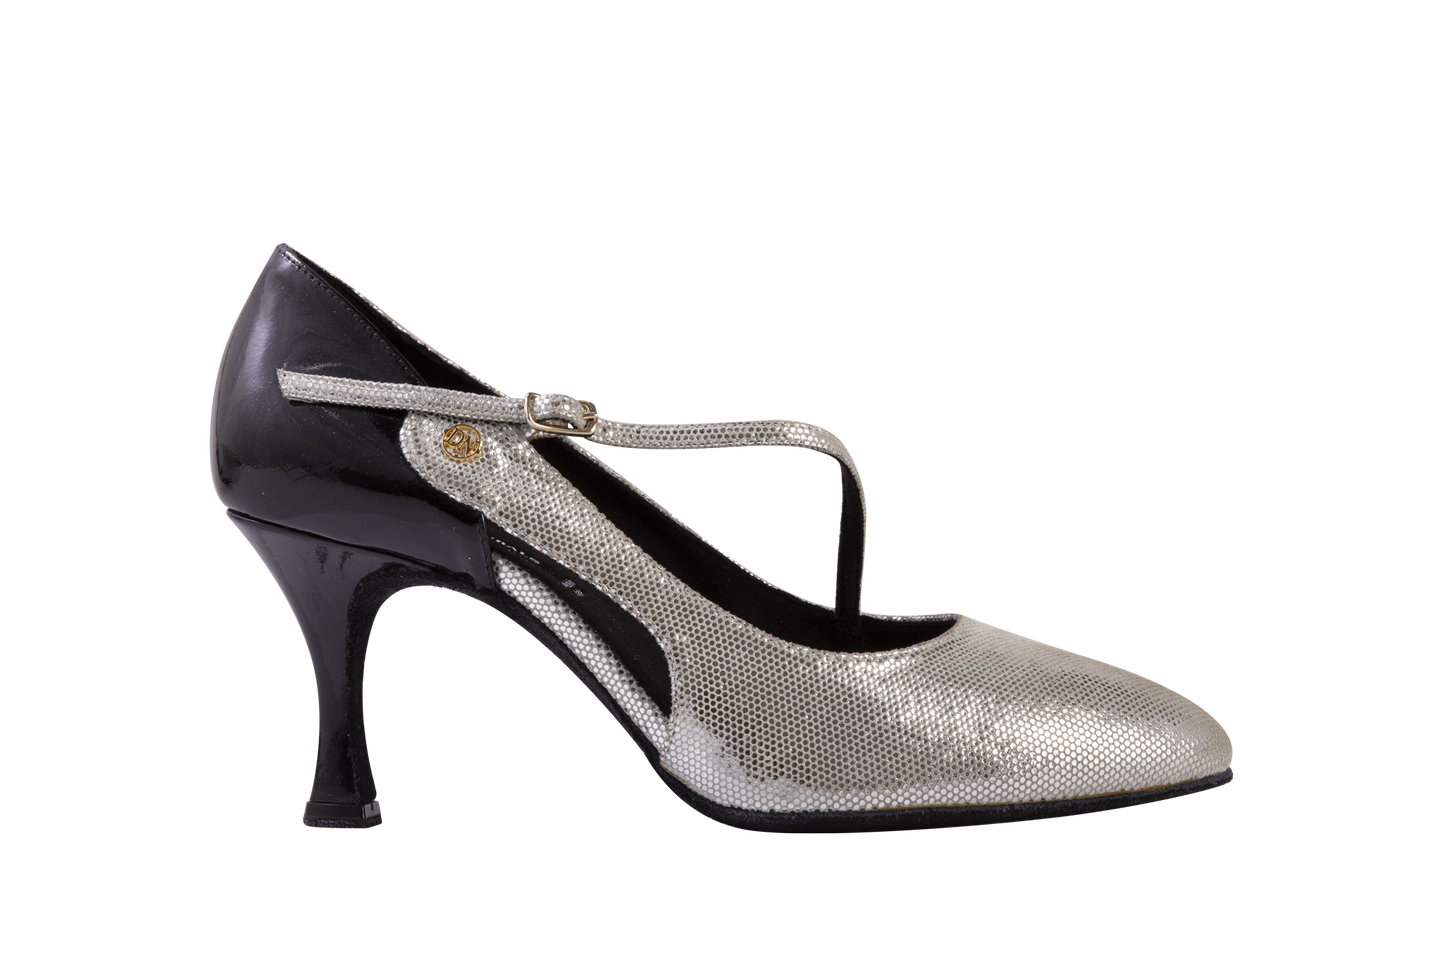 Dance Naturals 90 Moretta Black Patent and Silver Fish Rounded Toe Ballroom Dance Shoe with Diagonal Strap